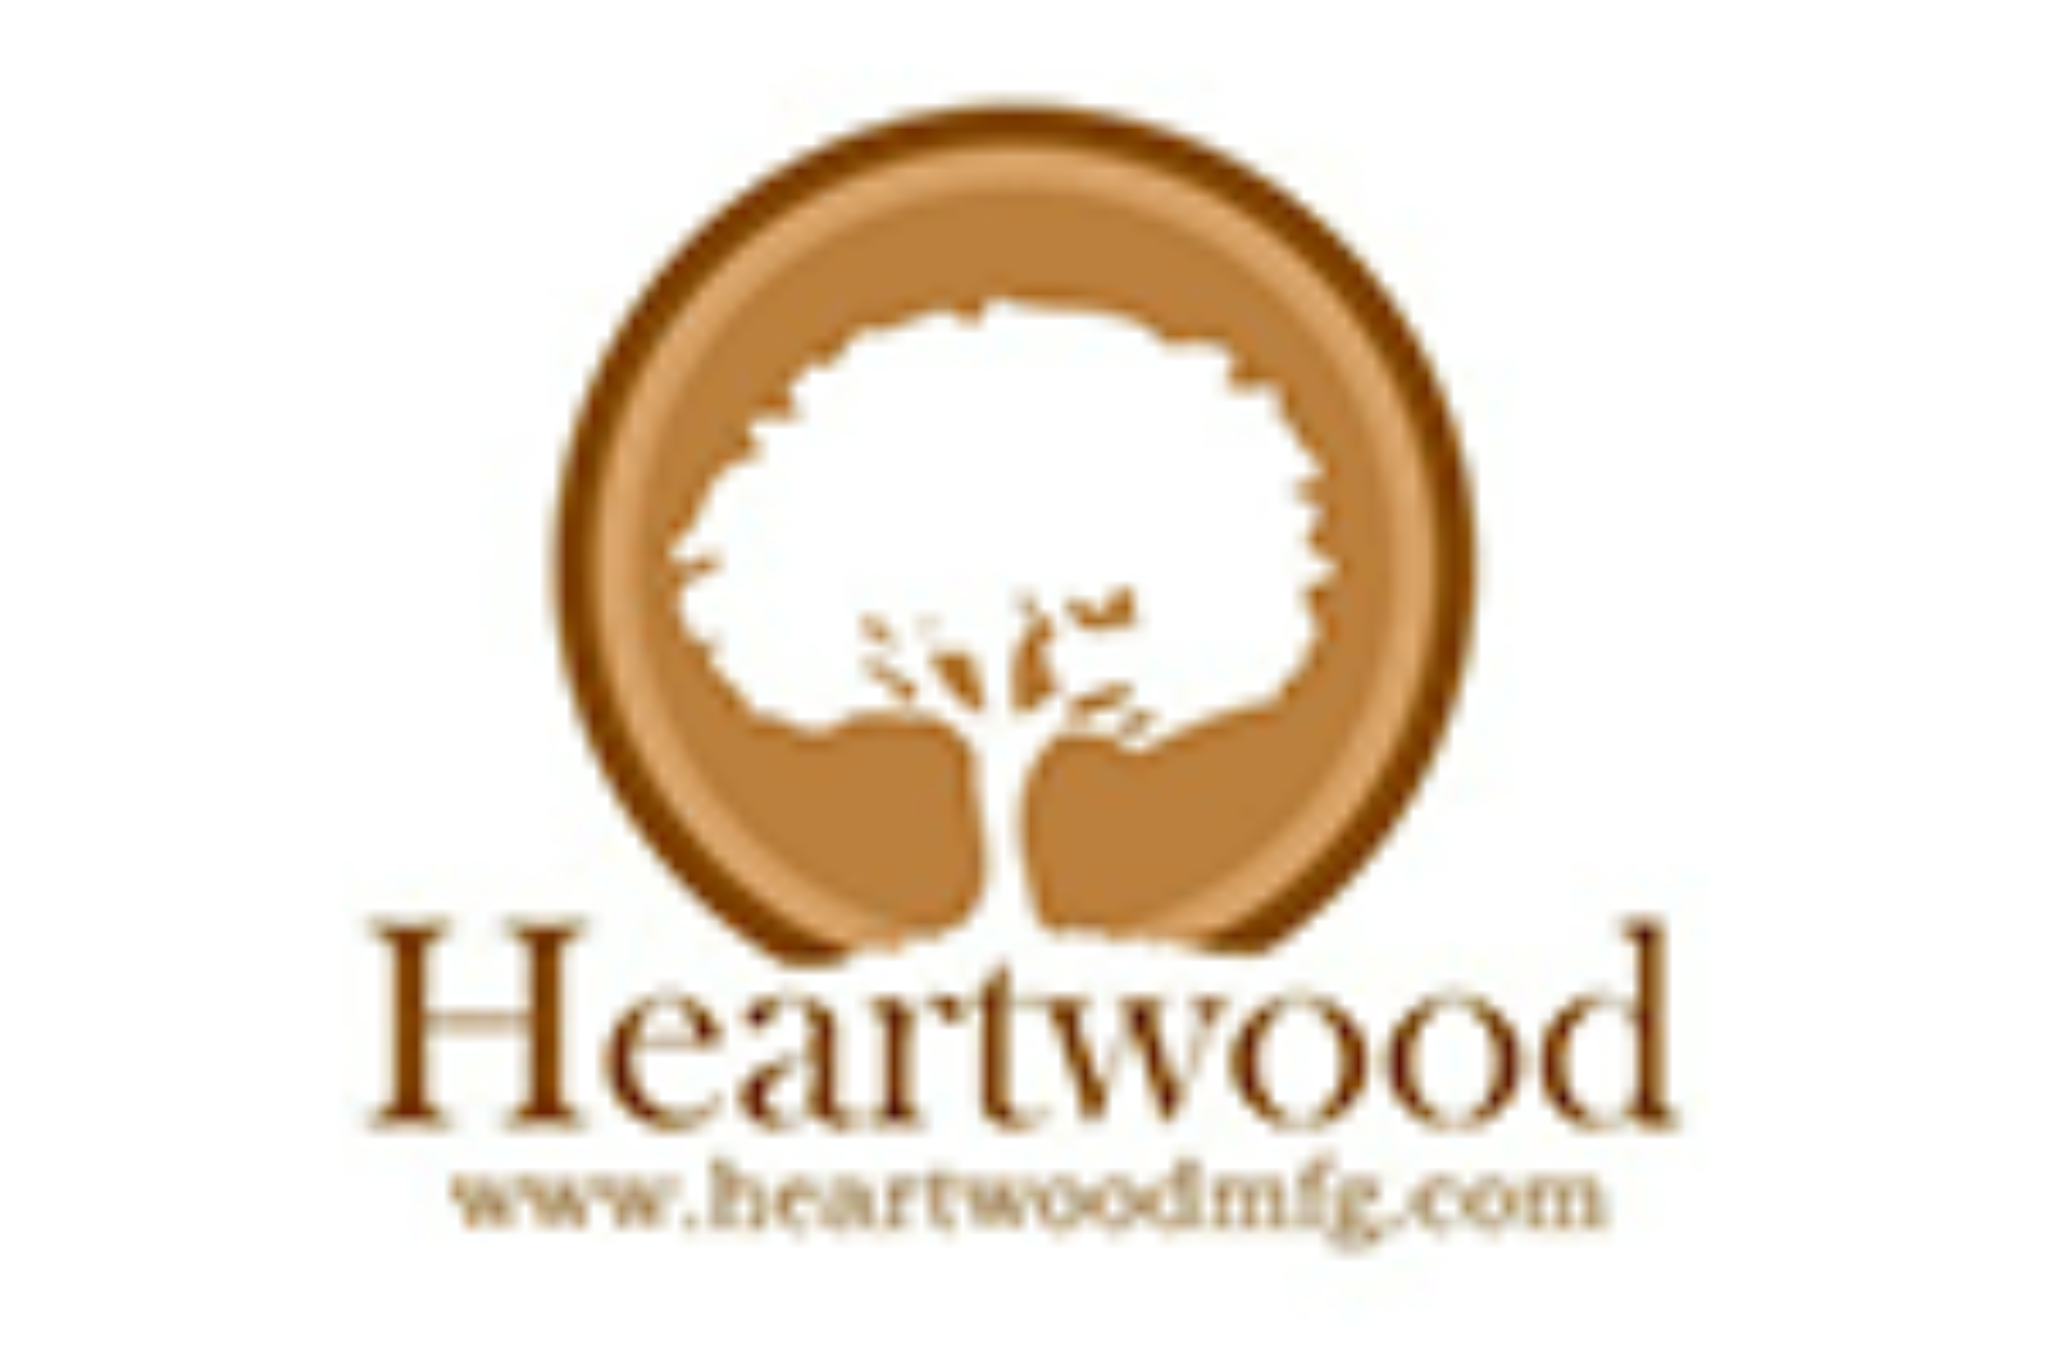 Heartwood Manufacturing, Inc. – Batesville Area Chamber of Commerce